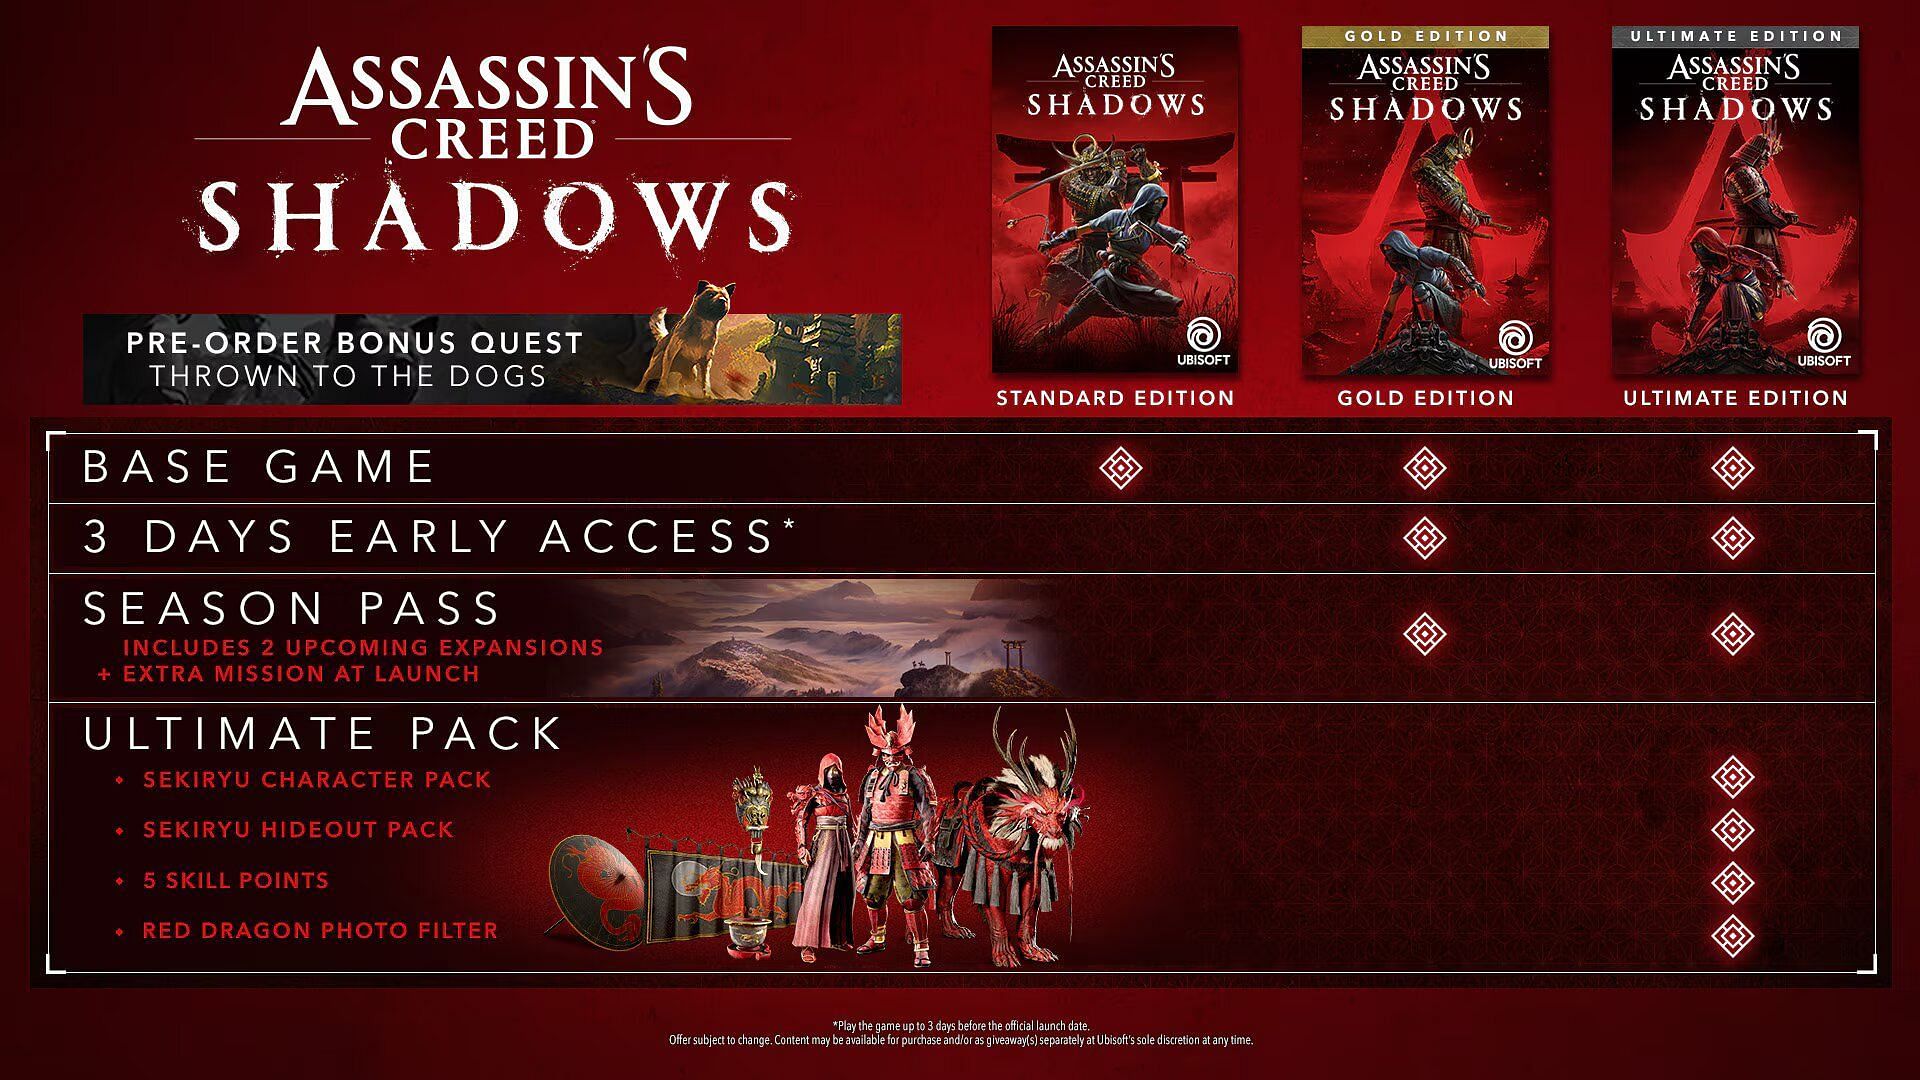 All the Digital Editions and their contents compared (Image via Ubisoft)